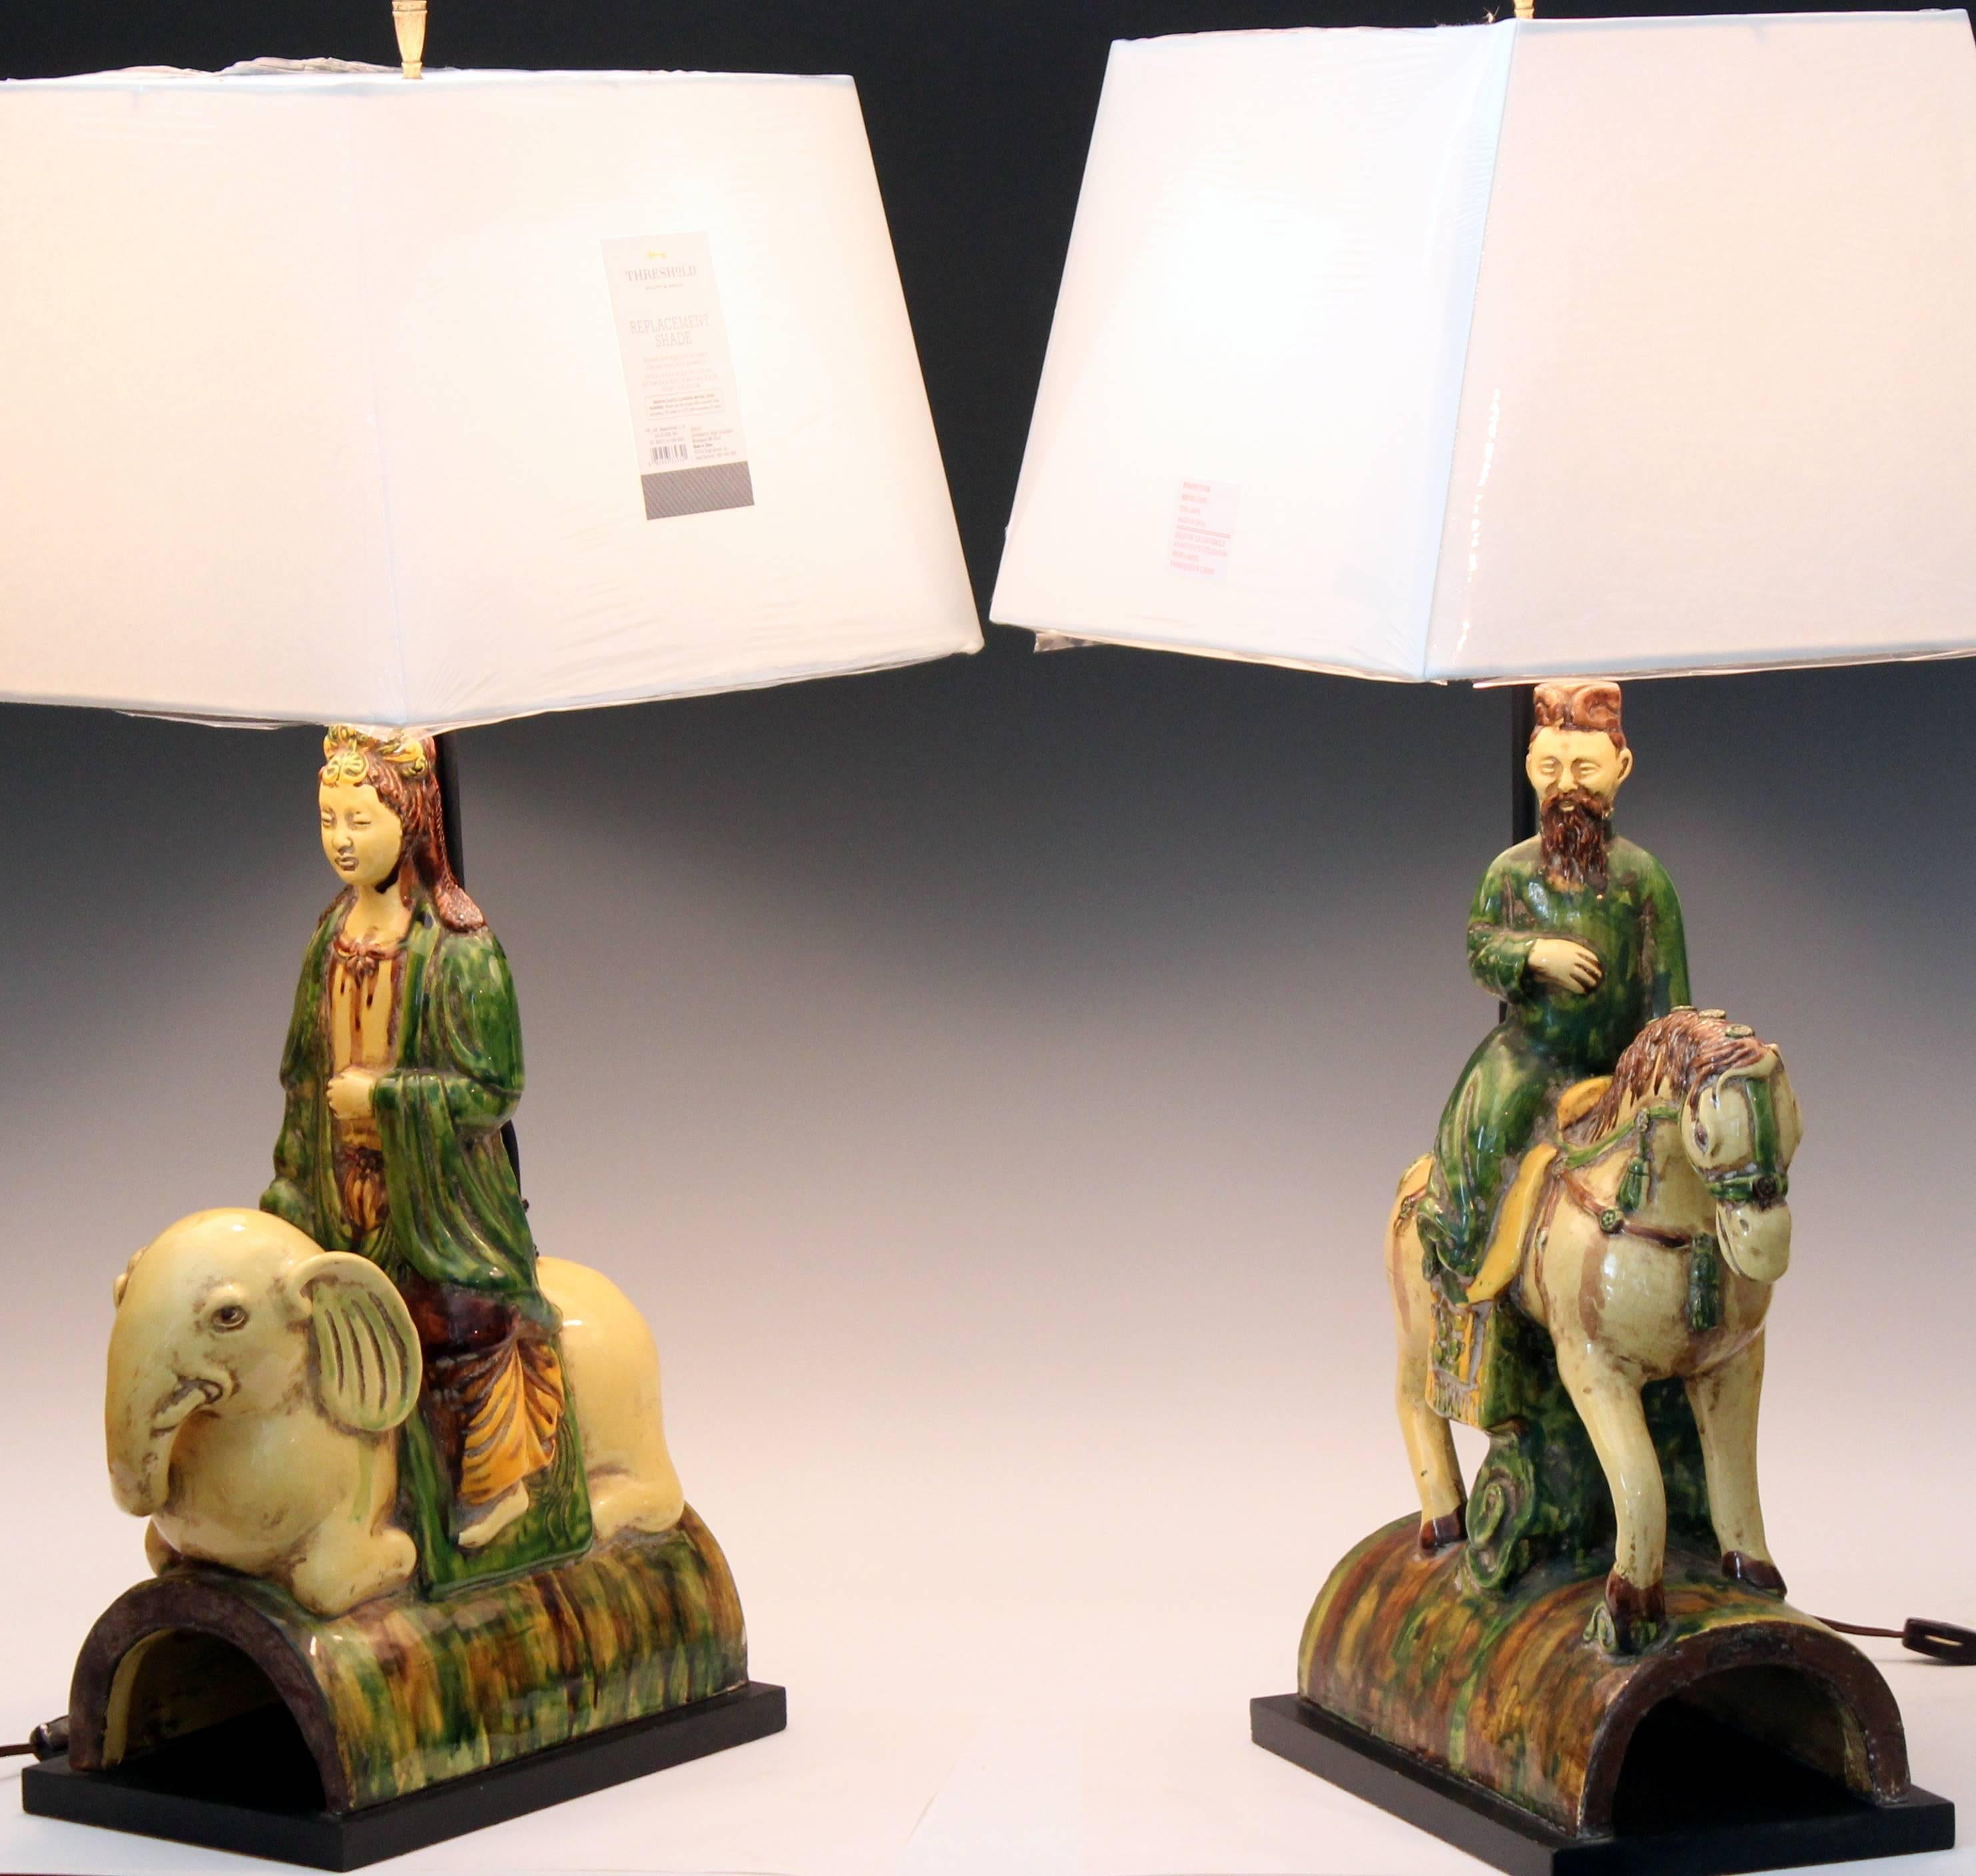 Pair of Zaccagnini Guanyin Buddha Figures Vintage Italian Ming Roof Tile Lamps 4